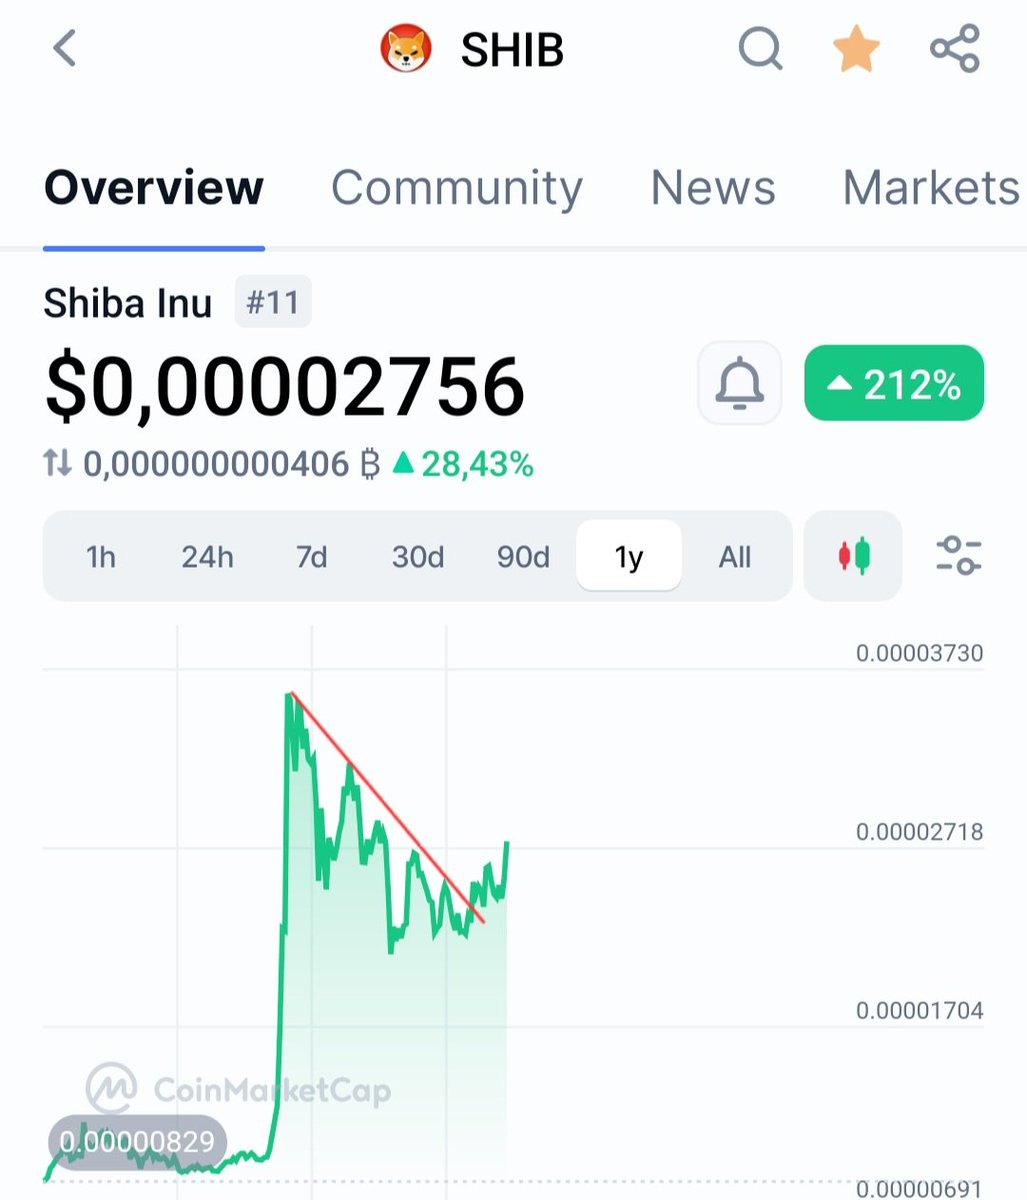 #SHIB continues to rise as I expected! 2024 will be the year of the new ATH!